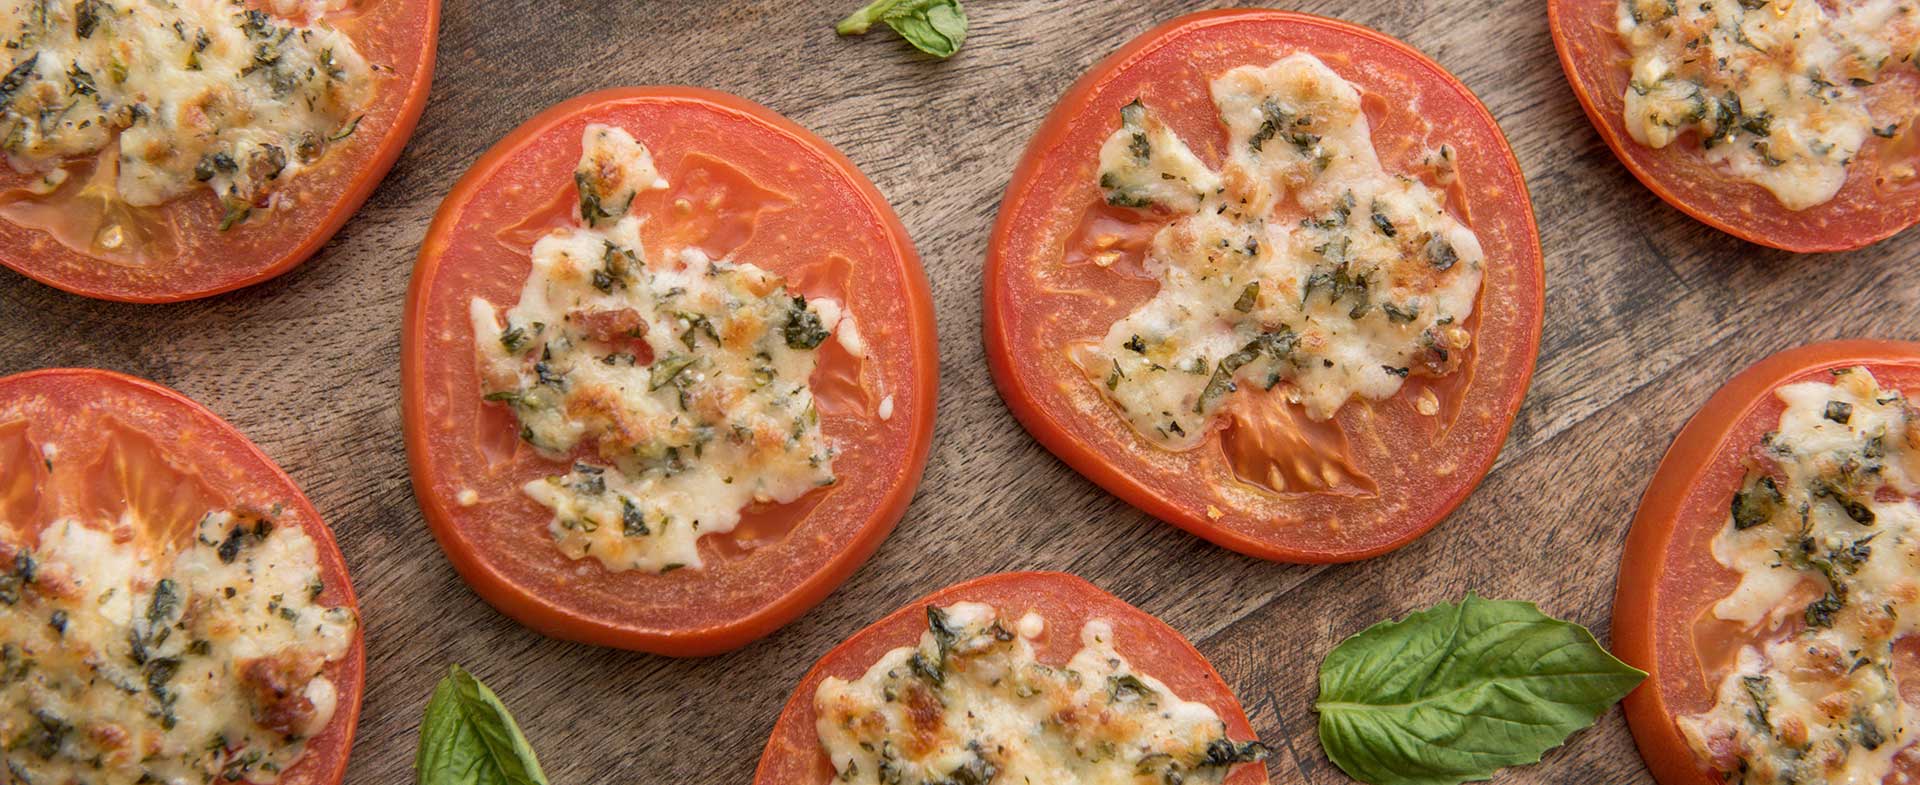 Parmesan and herb broiled tomatoes recipe video